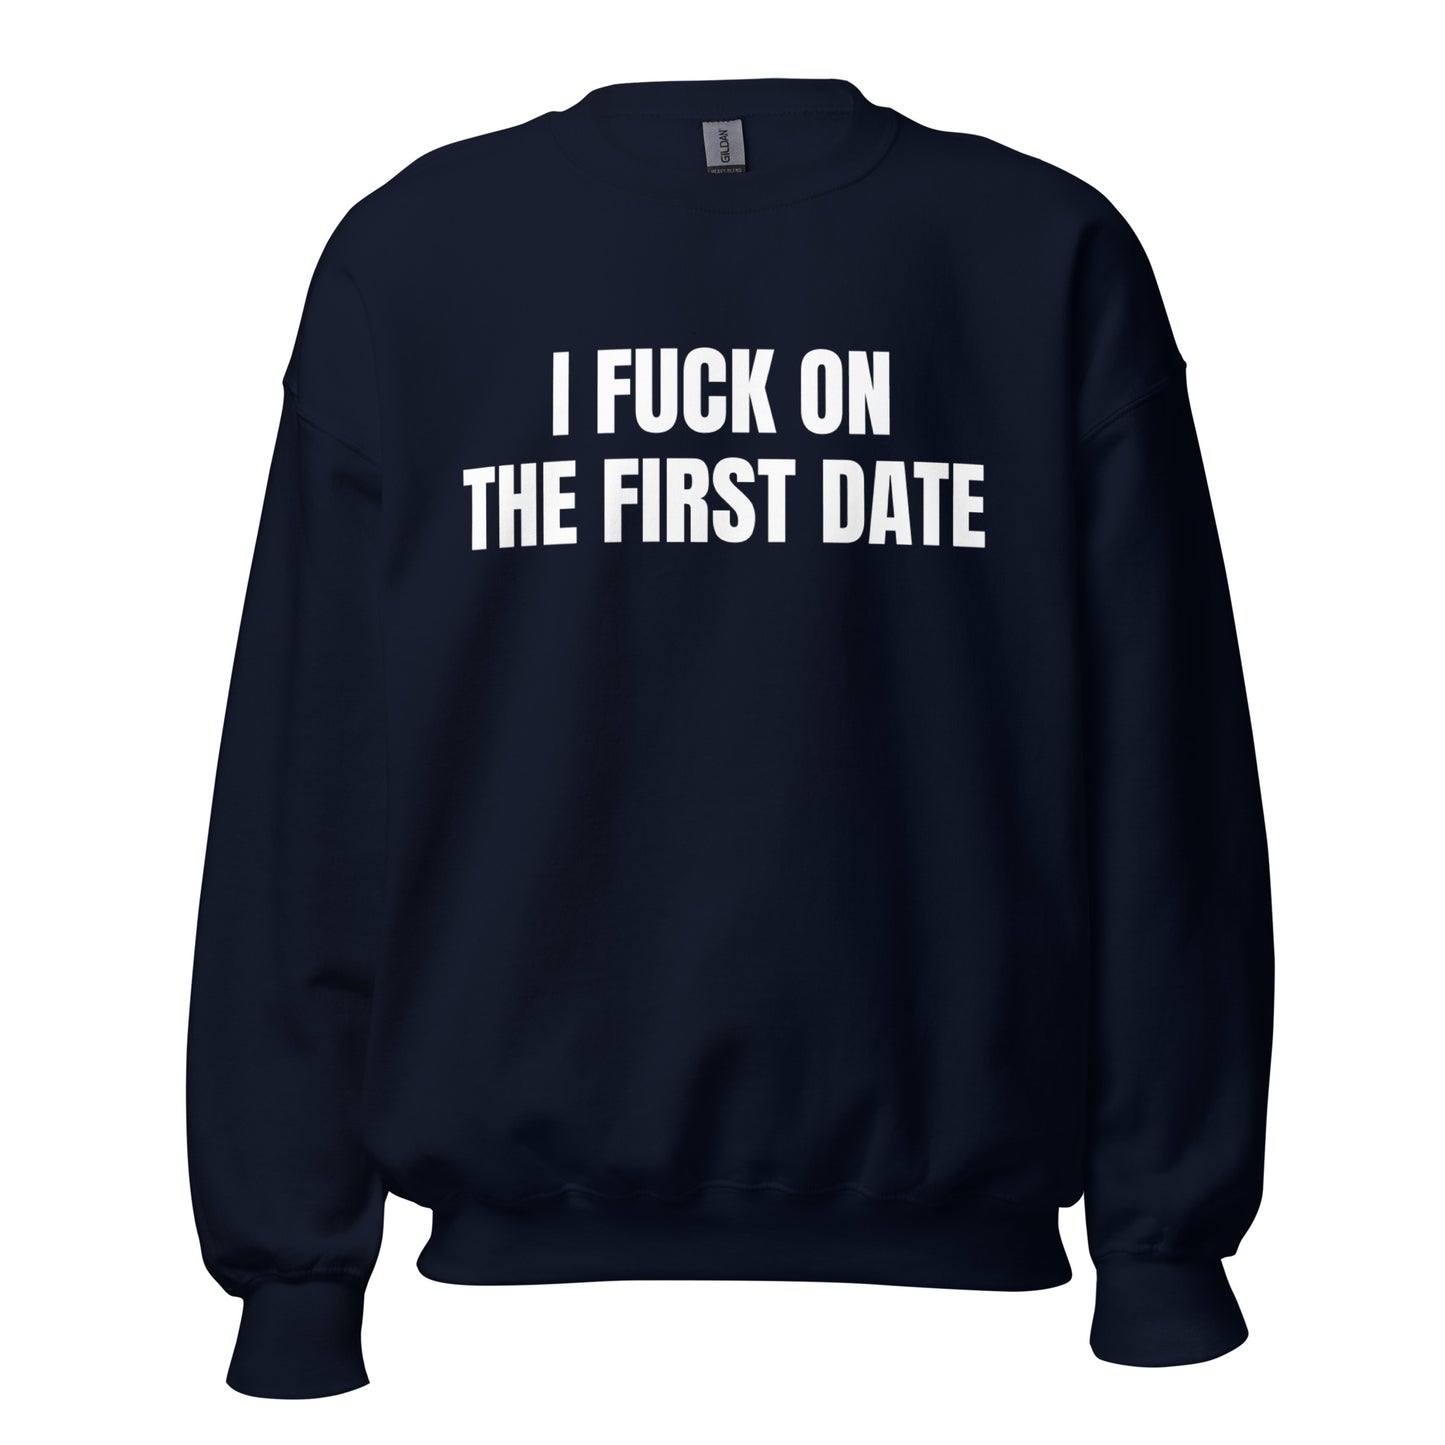 I FUCK ON THE FIRST DATE